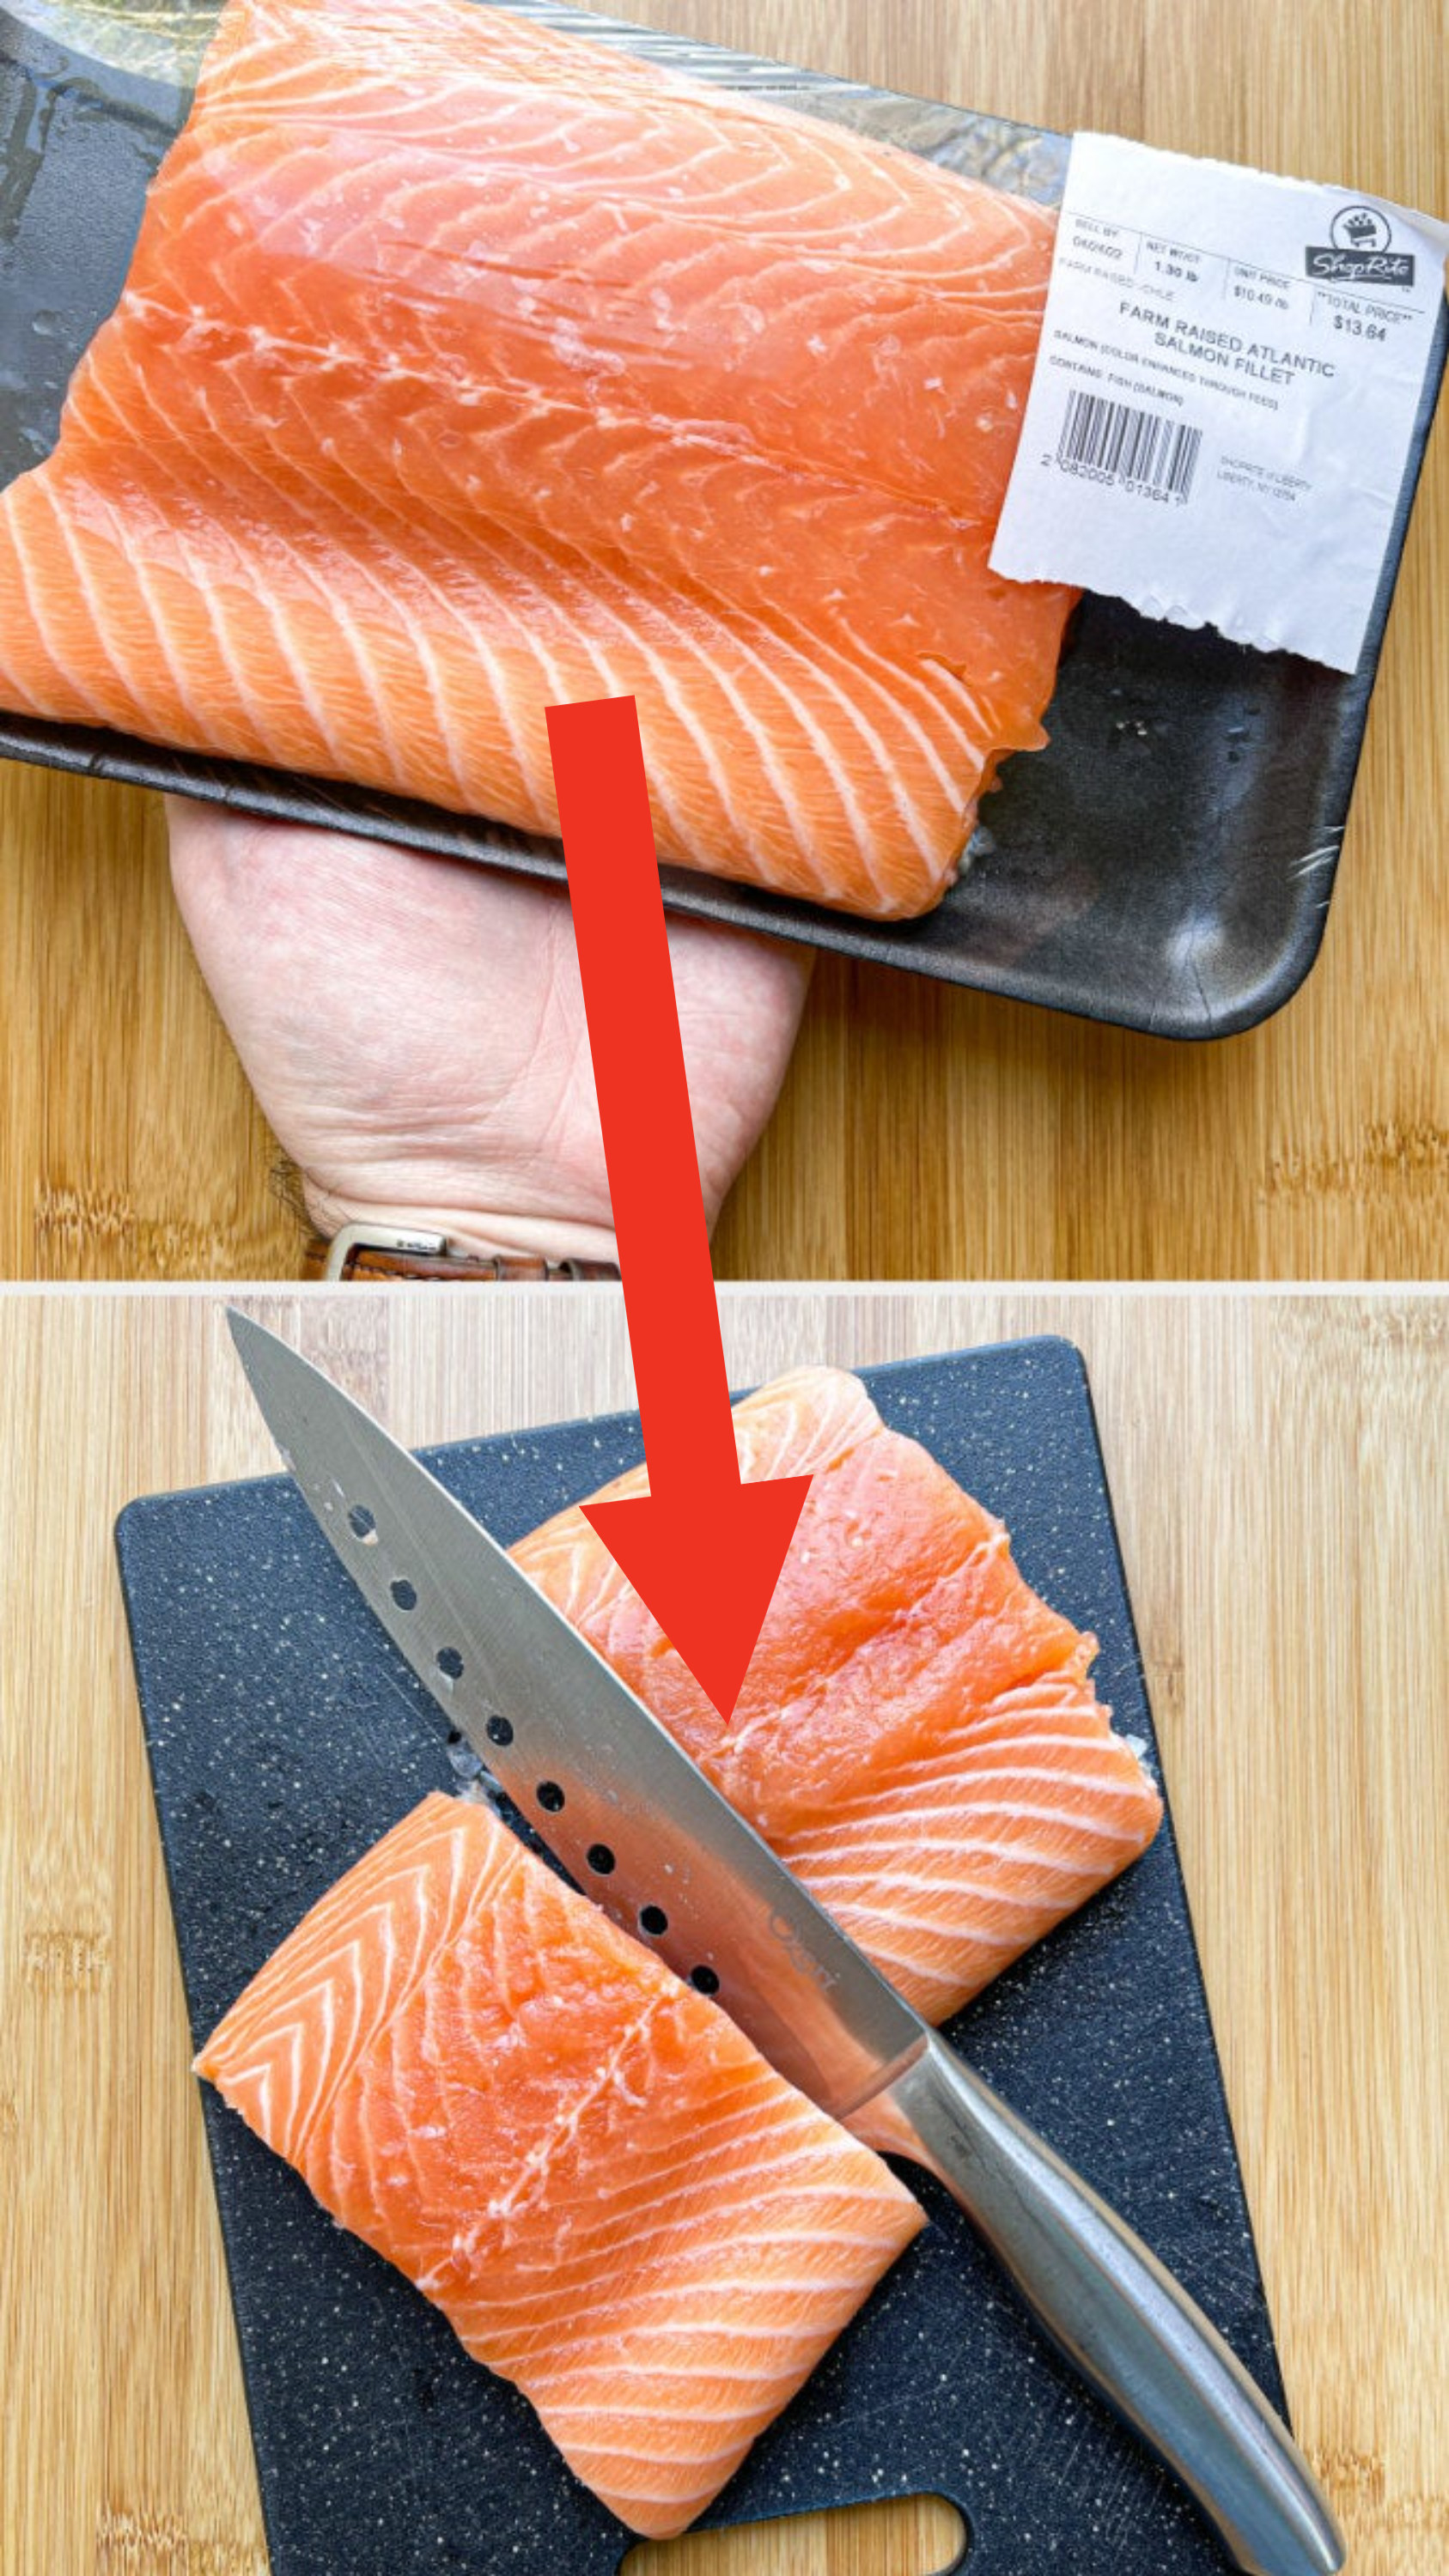 A salmon fillet still in its packaging; a salmon fillet on a cutting board with a knife going through it